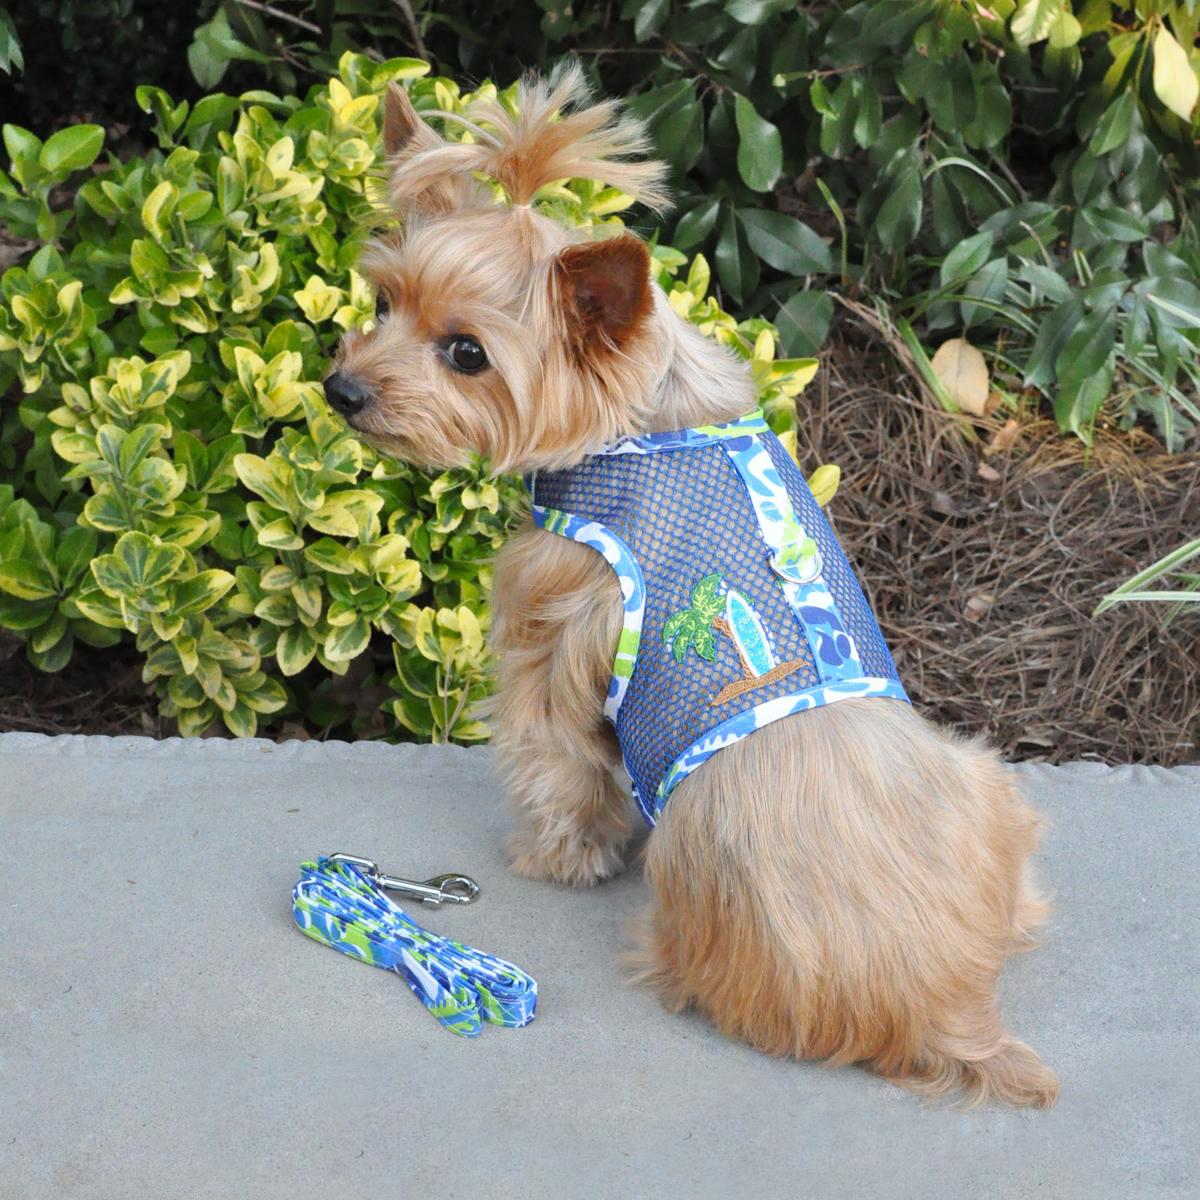 Cool Mesh Dog Harness with Leash by Doggie Design - Surfboard Blue and Green